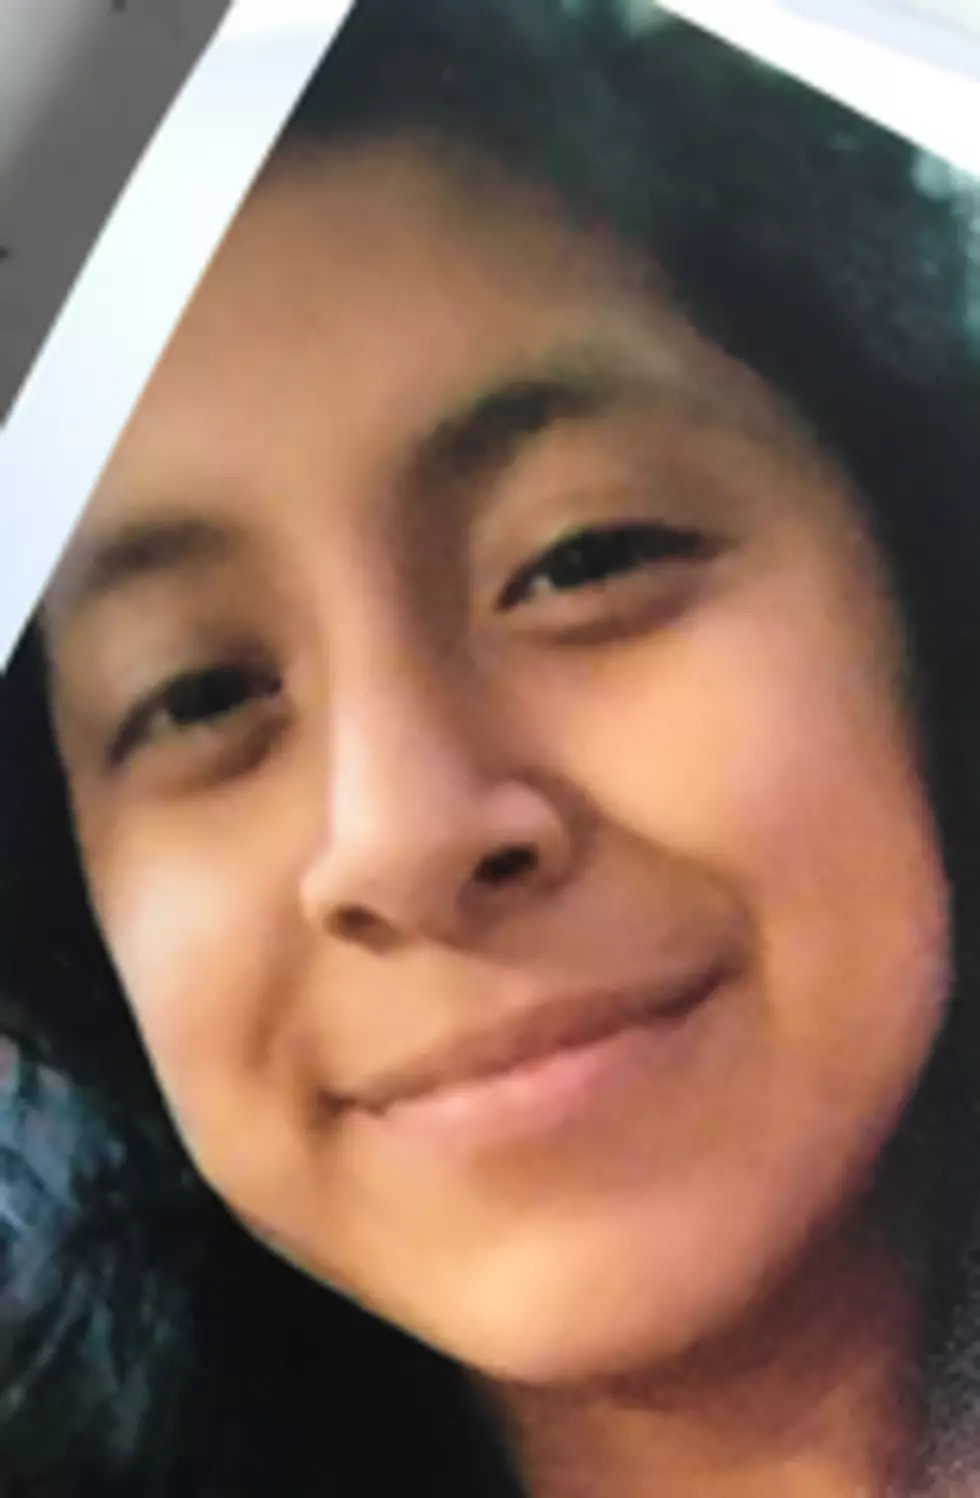 Lakewood Police need your helping finding missing teen